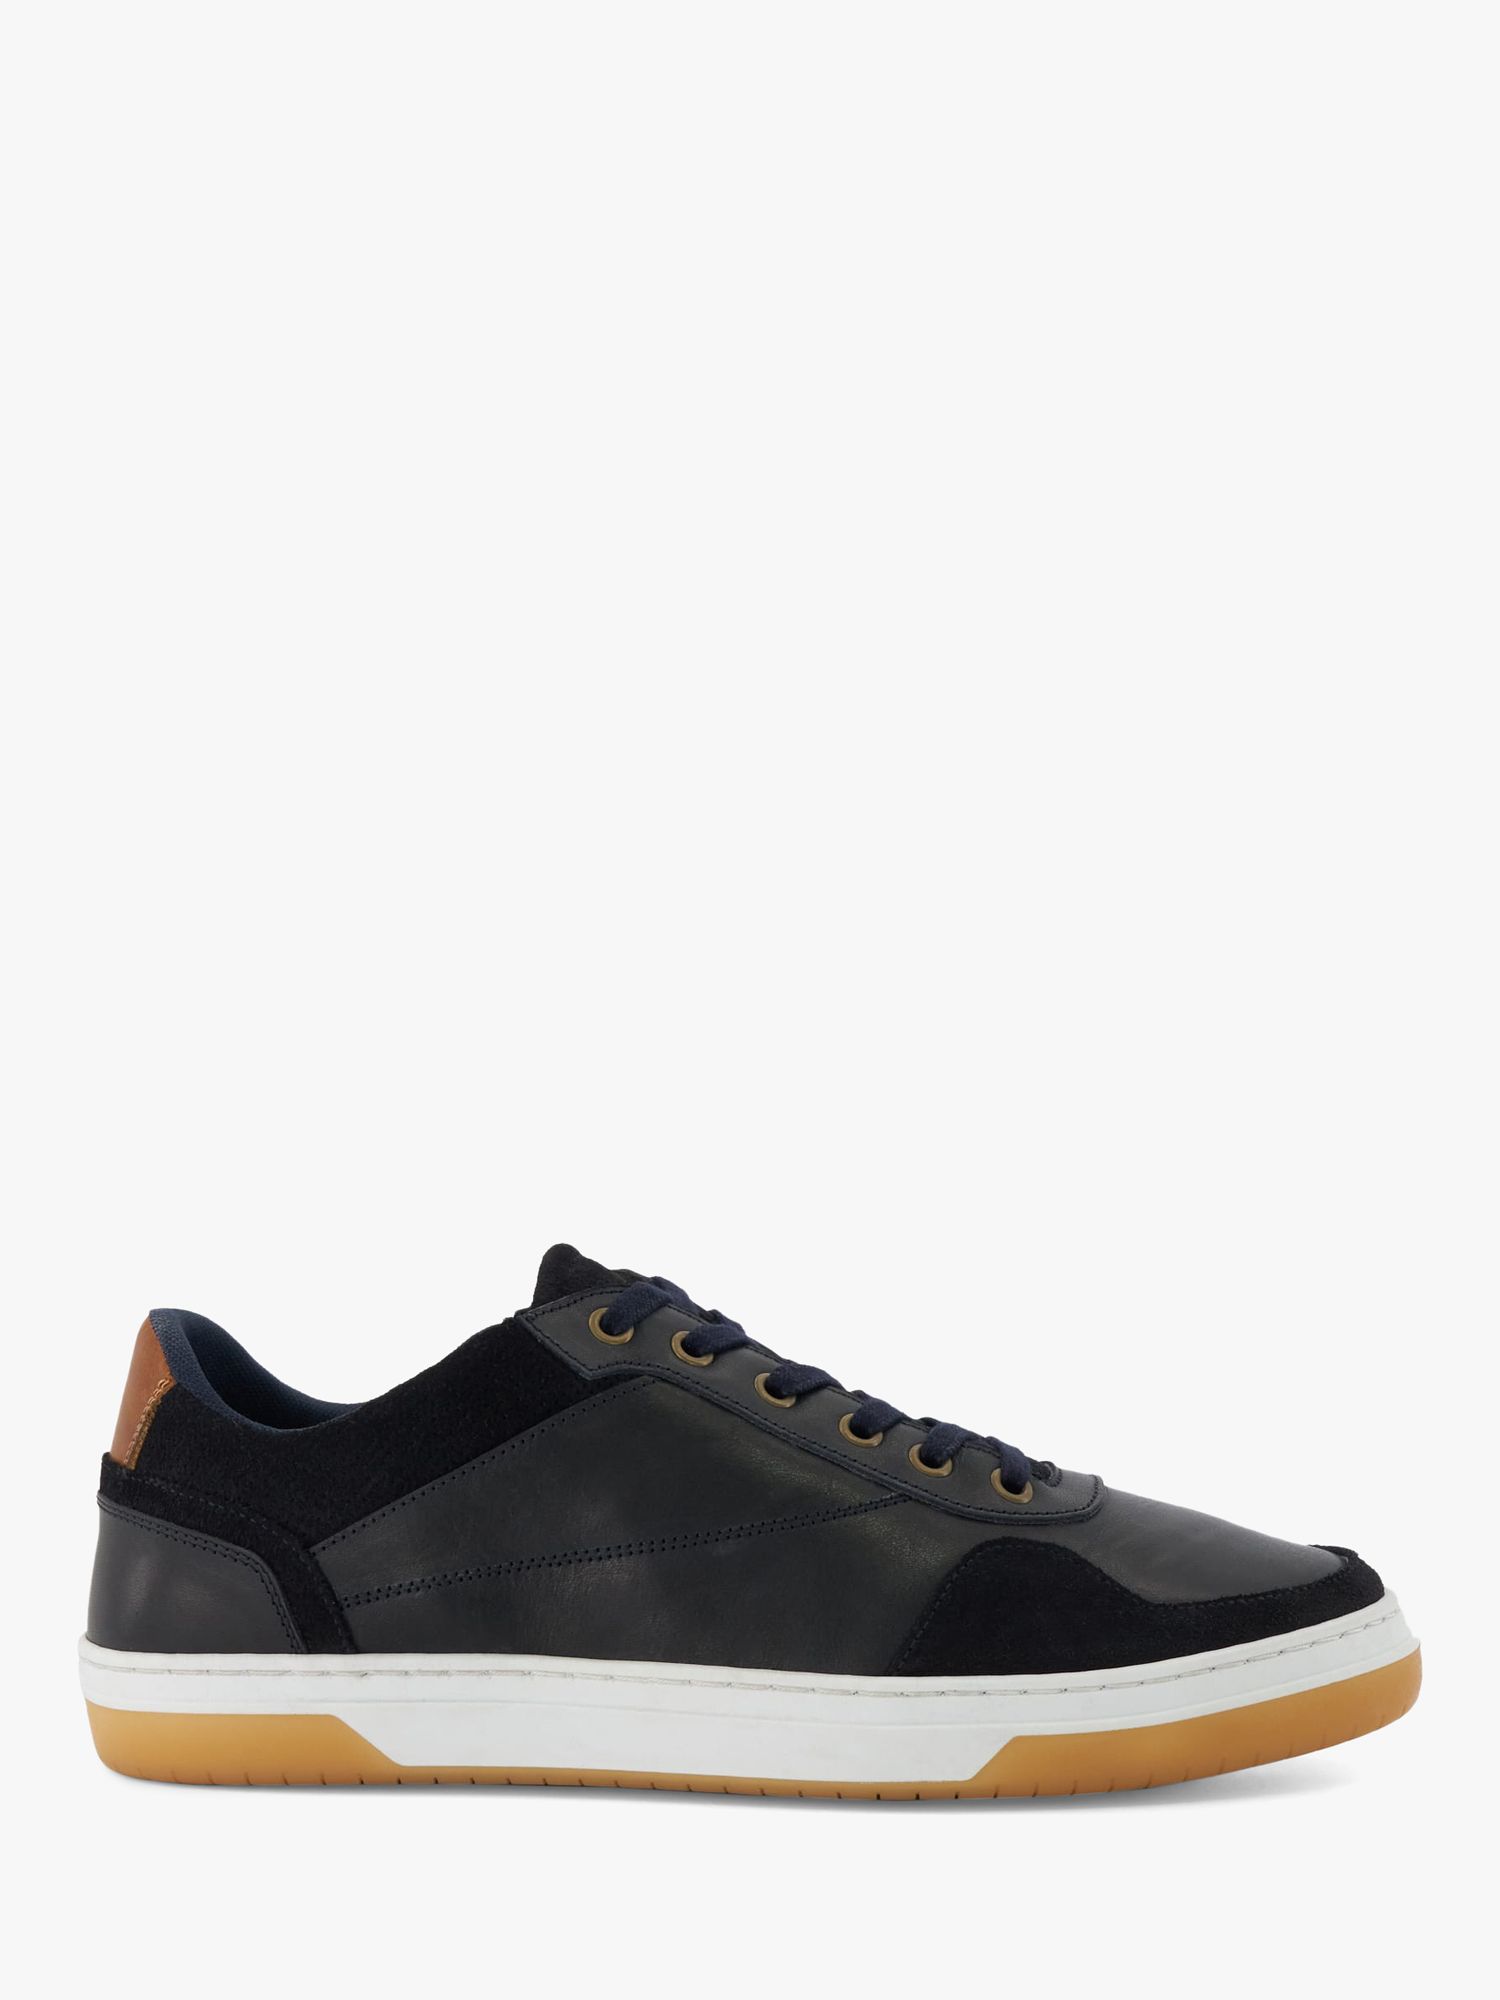 Dune Thorin Leather Lace Up Trainers, Navy at John Lewis & Partners